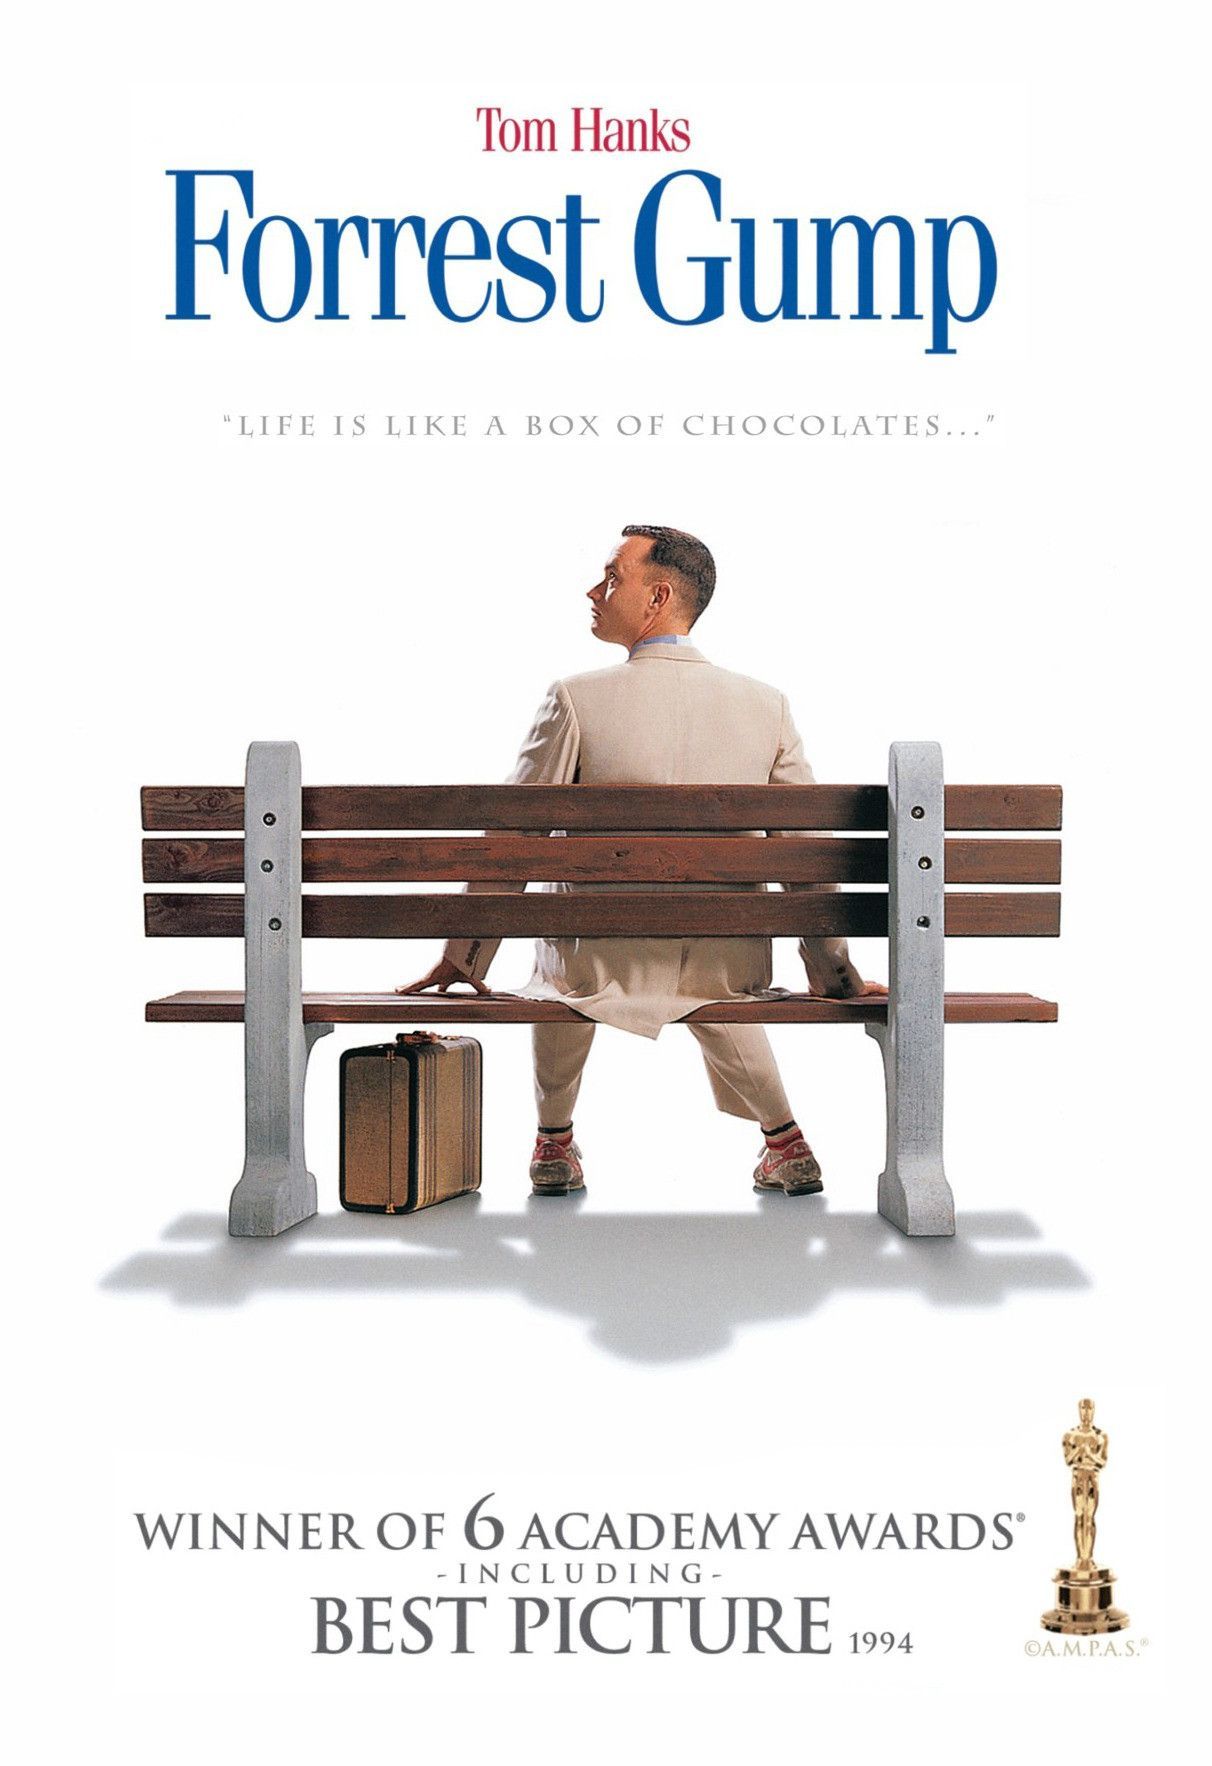 Forrest Gump film promotional poster featuring Tom Hanks on a bench